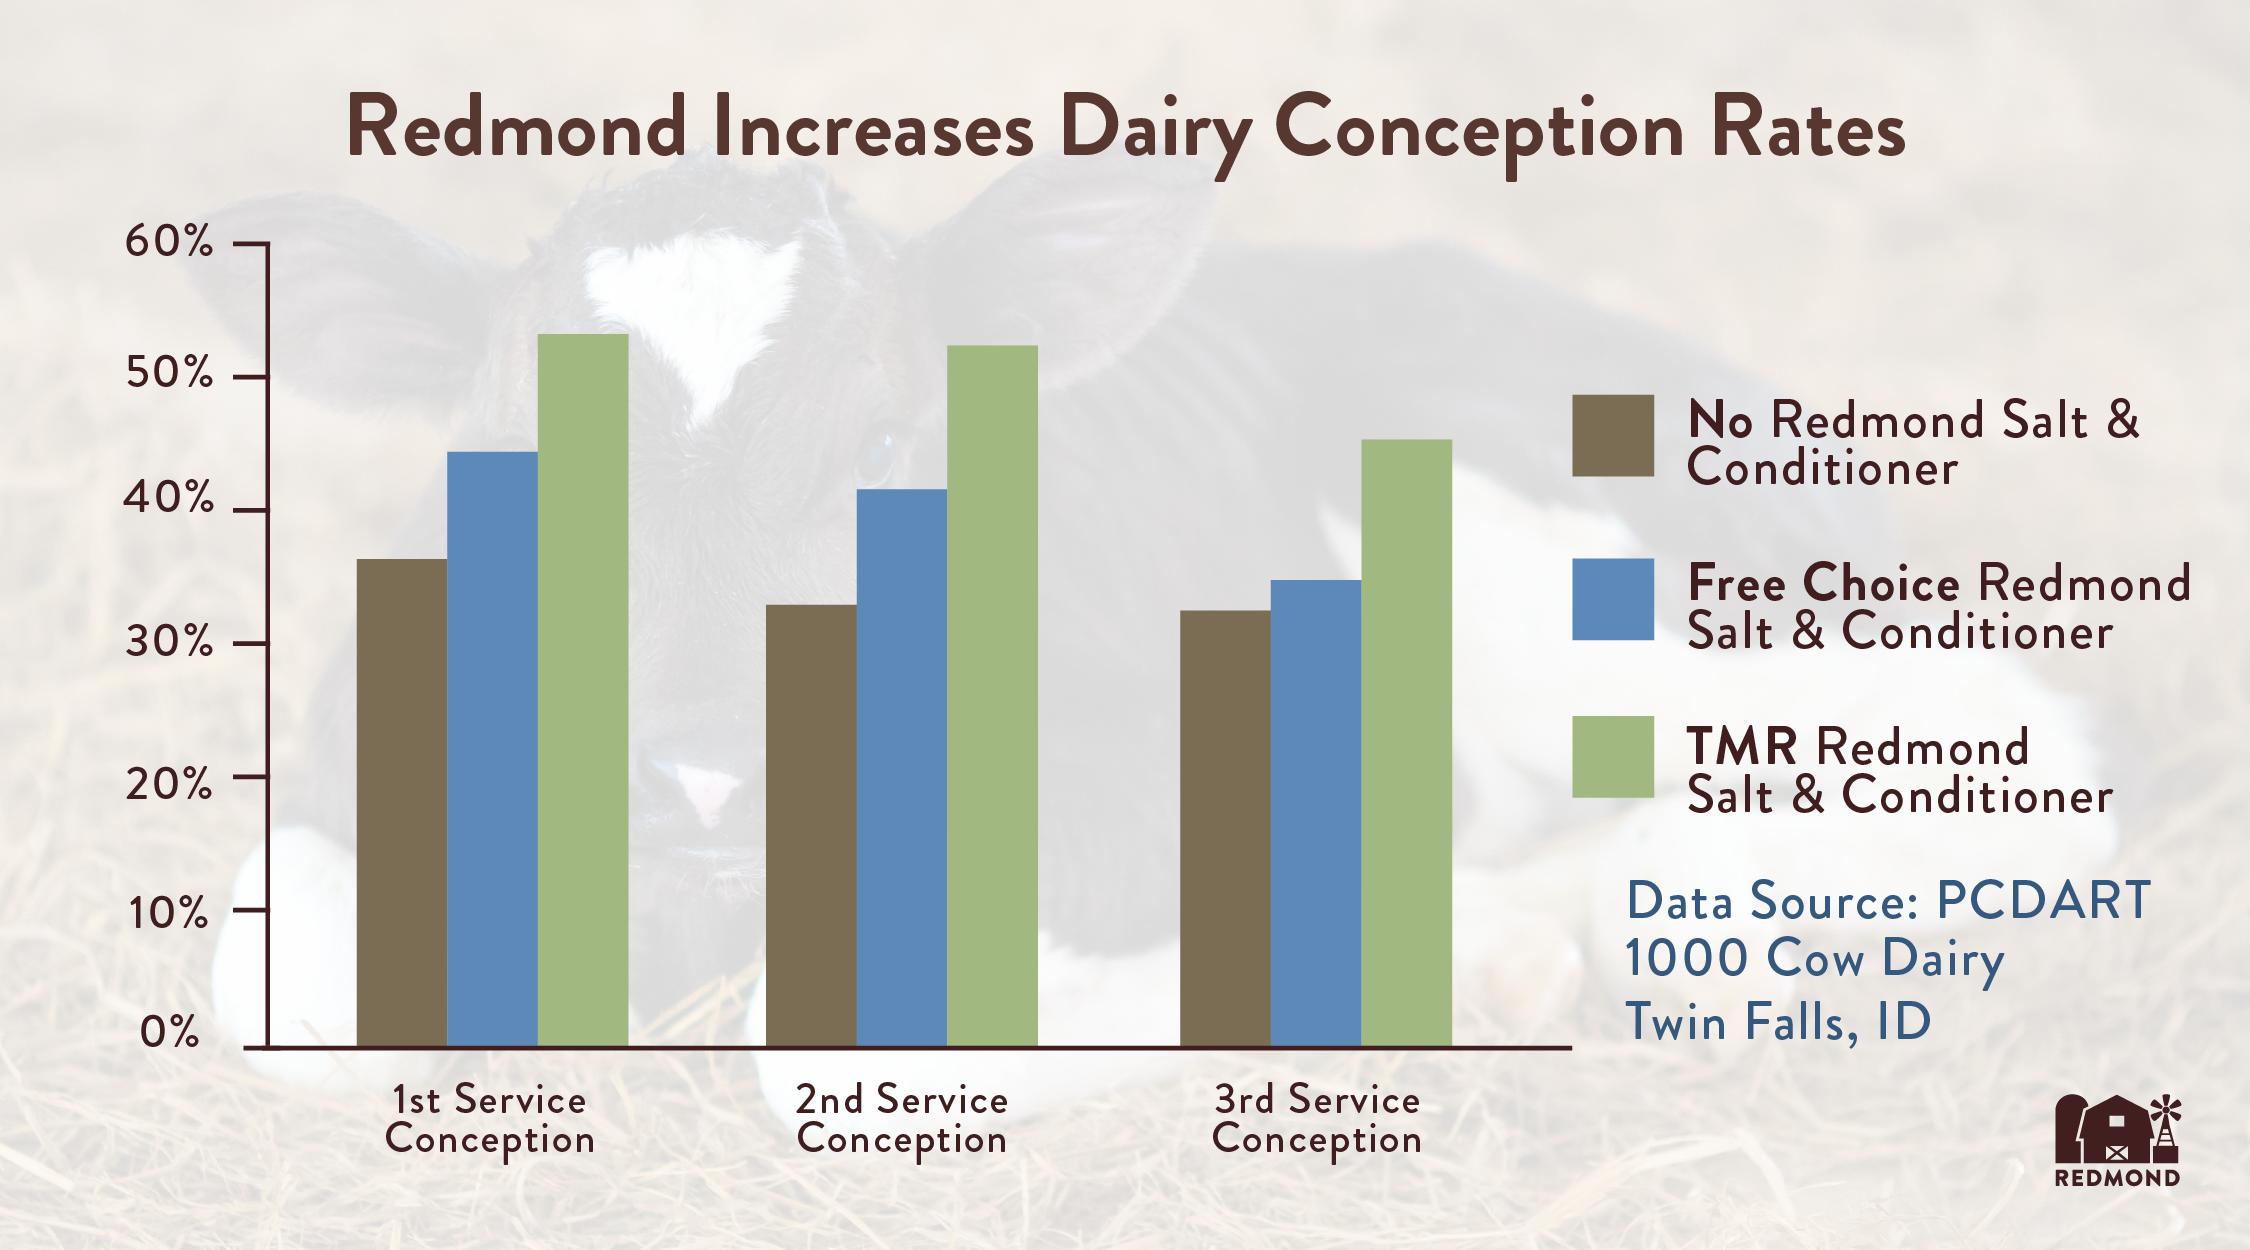 Redmond increases dairy conception rates